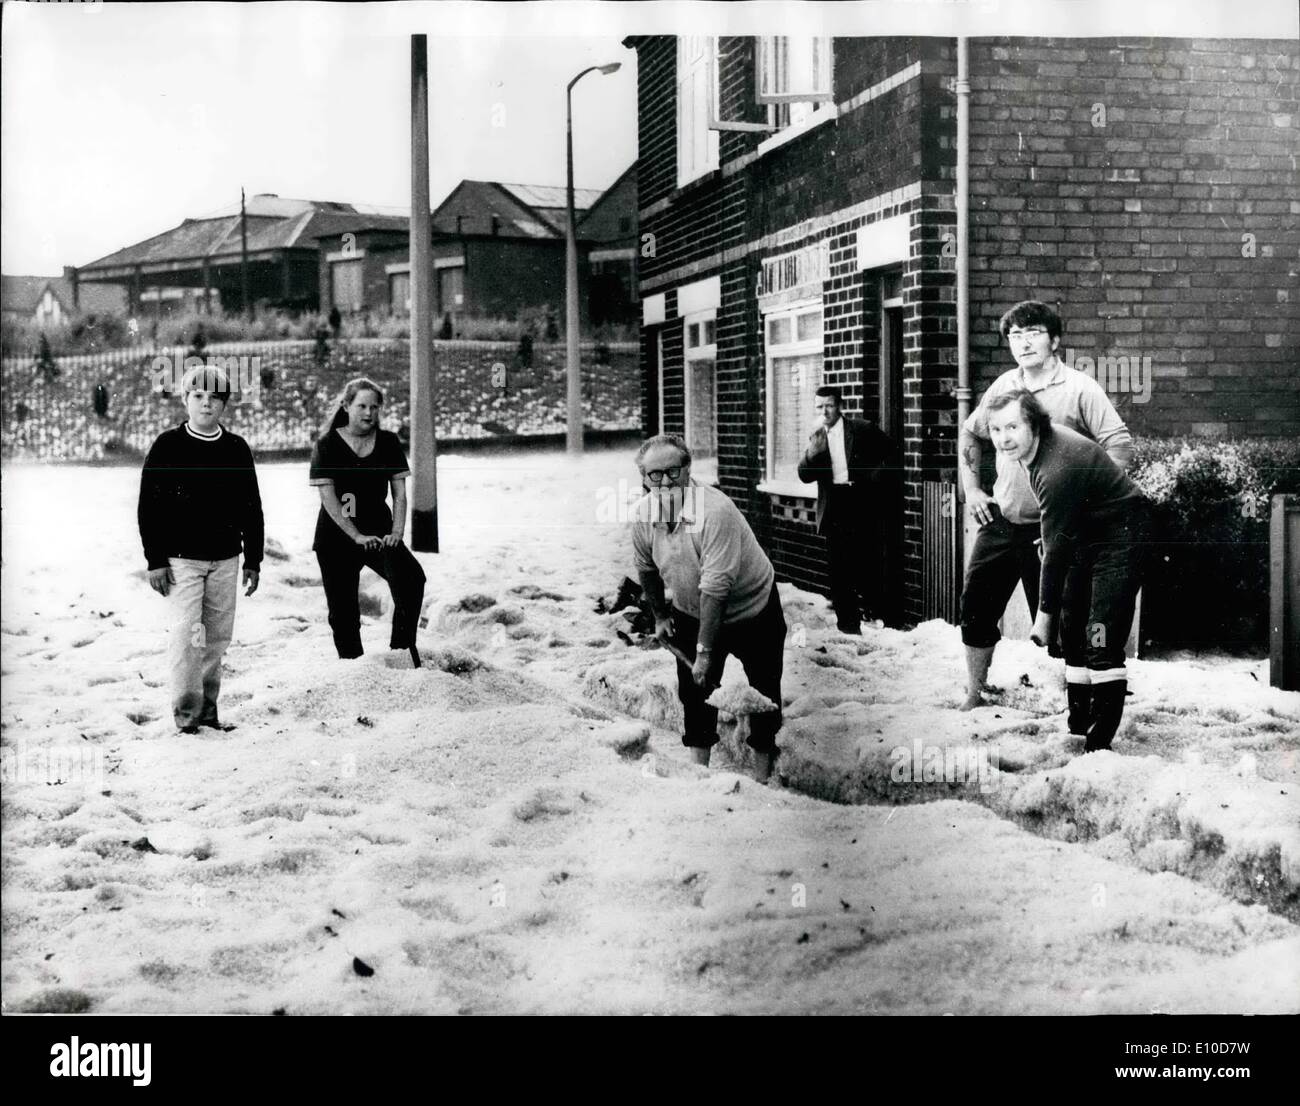 Jul. 07, 1972 - Hail the feet deep. Hailstones, the size of marbles, poured down in Nottingham, causing severe flooding. Boats had to be used to rescue people trapped in cars. Photo shows:- Residents clearing away the giant hailstones, which were as much as three feet deep, in Radford, Nottingham. Stock Photo